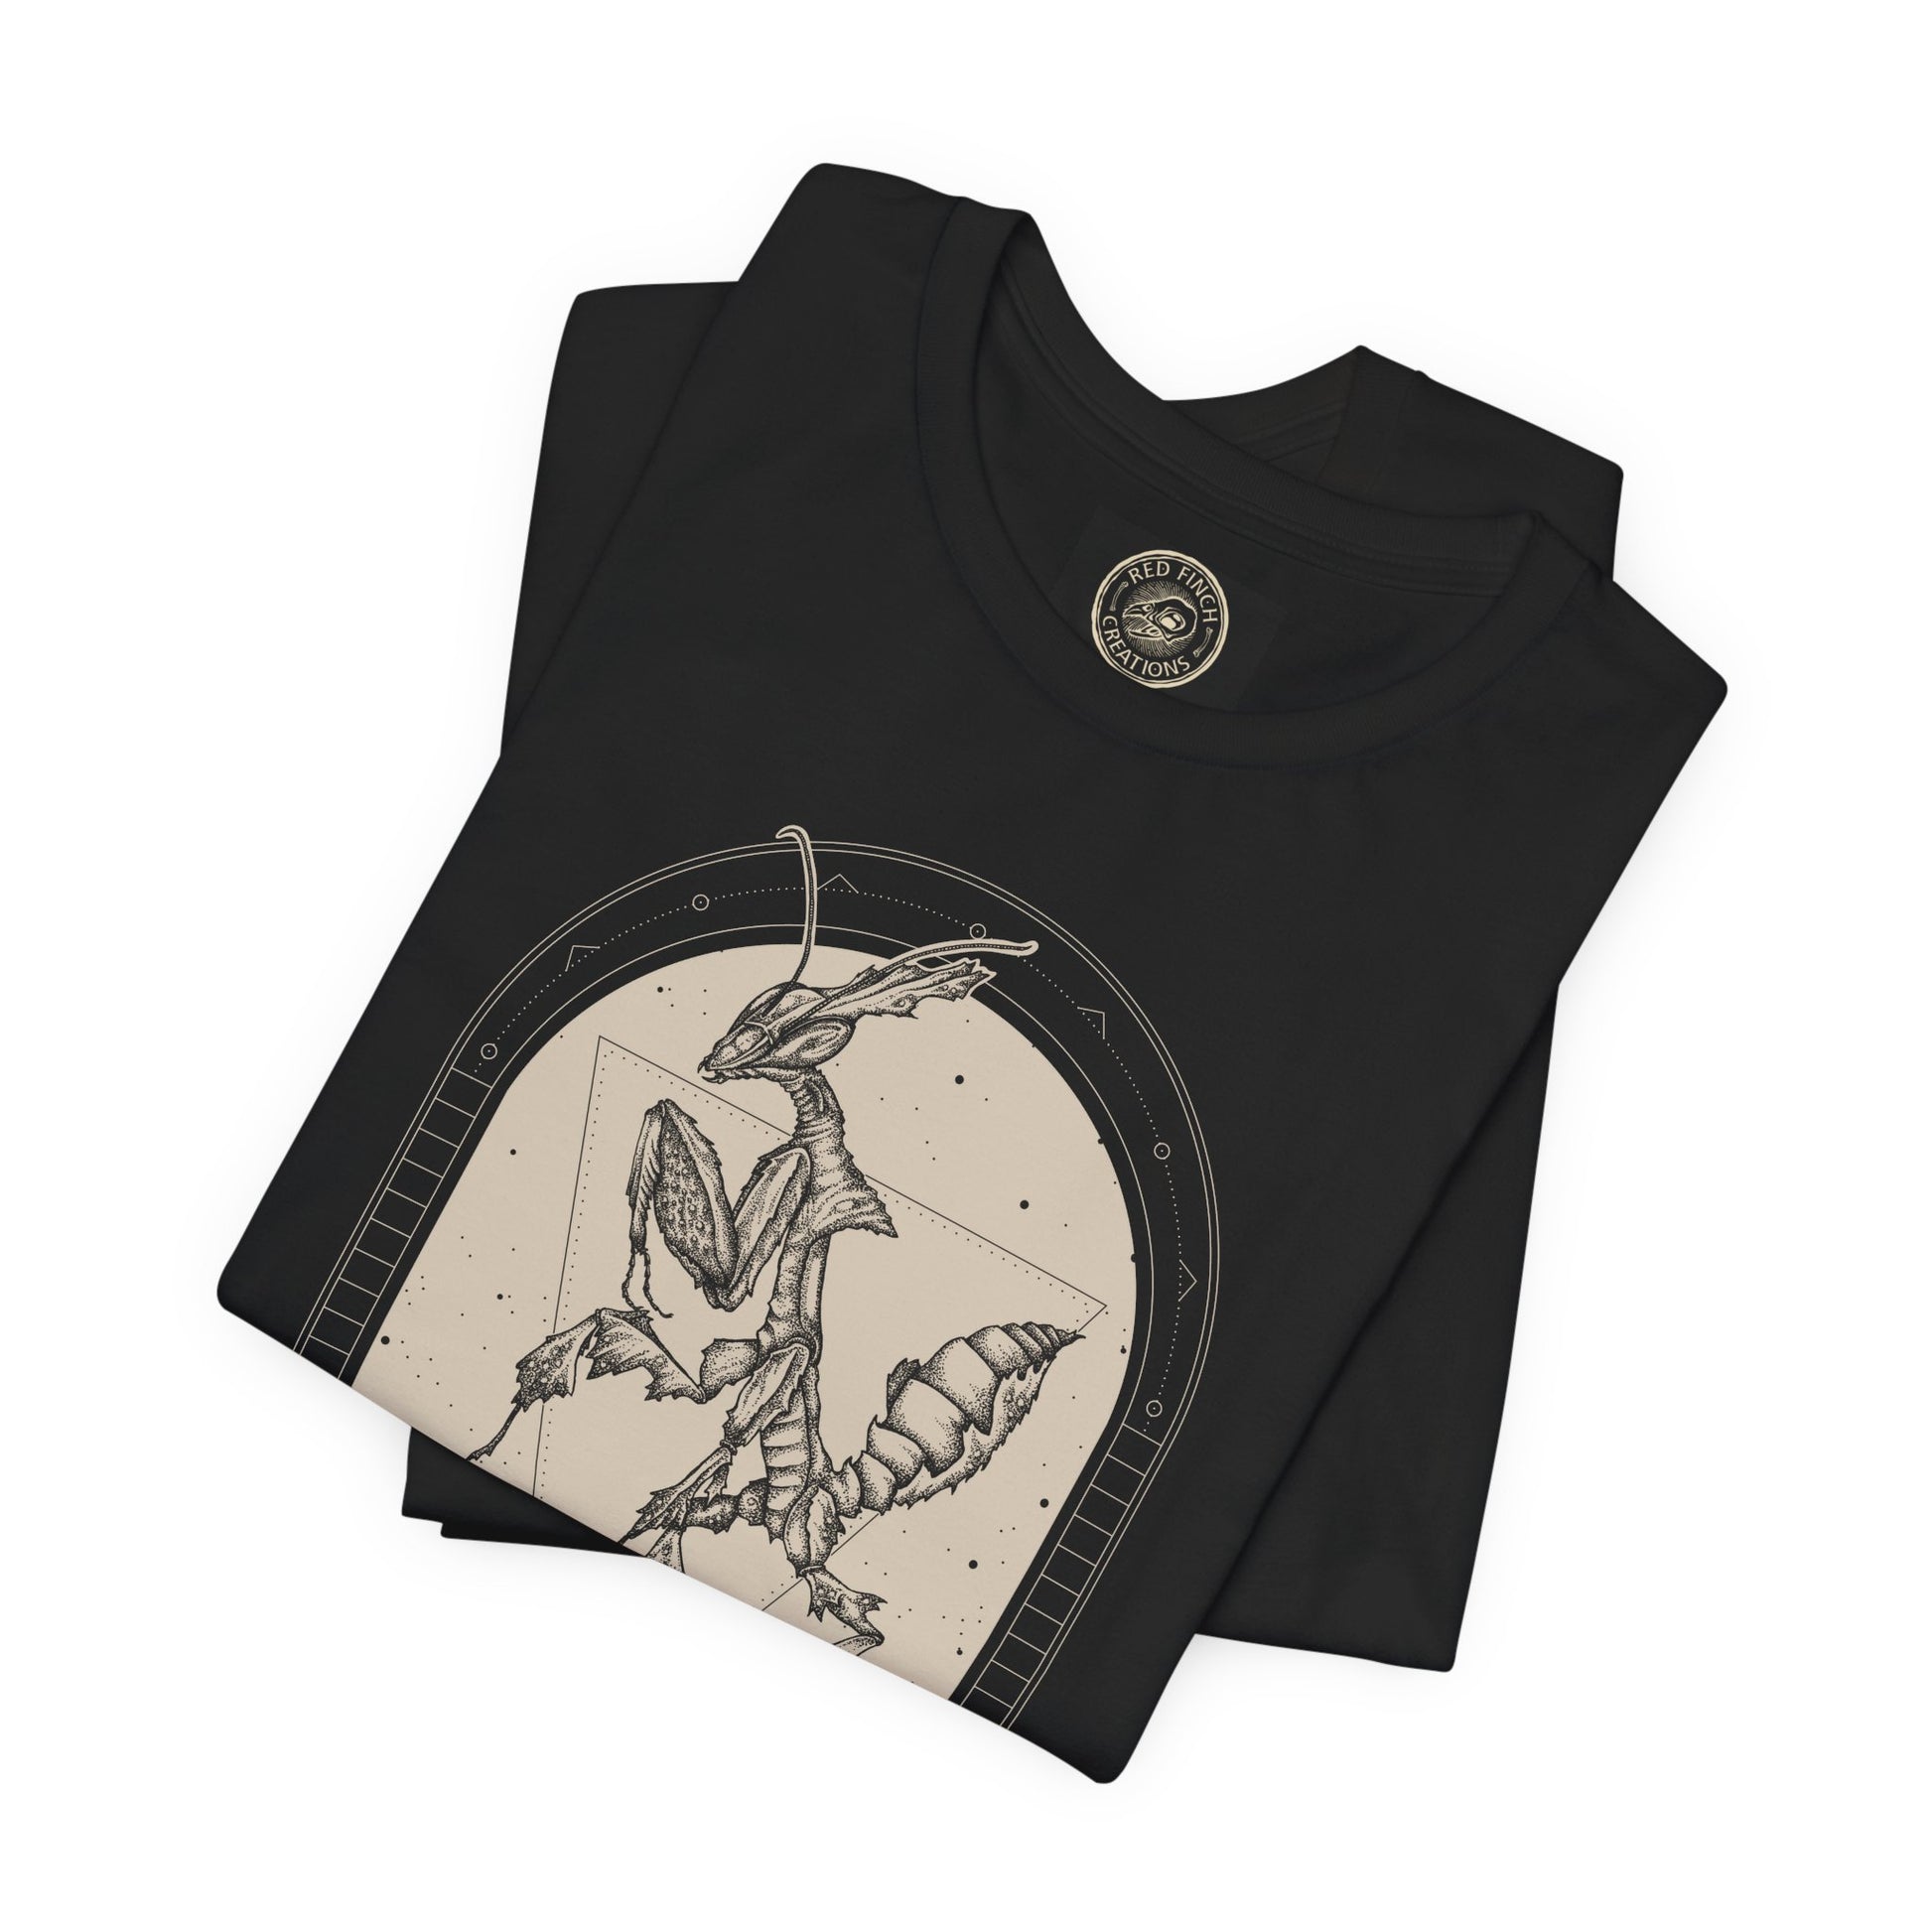 a witchy occult ghost mantis illustration on a folded black tee by cred finch creations